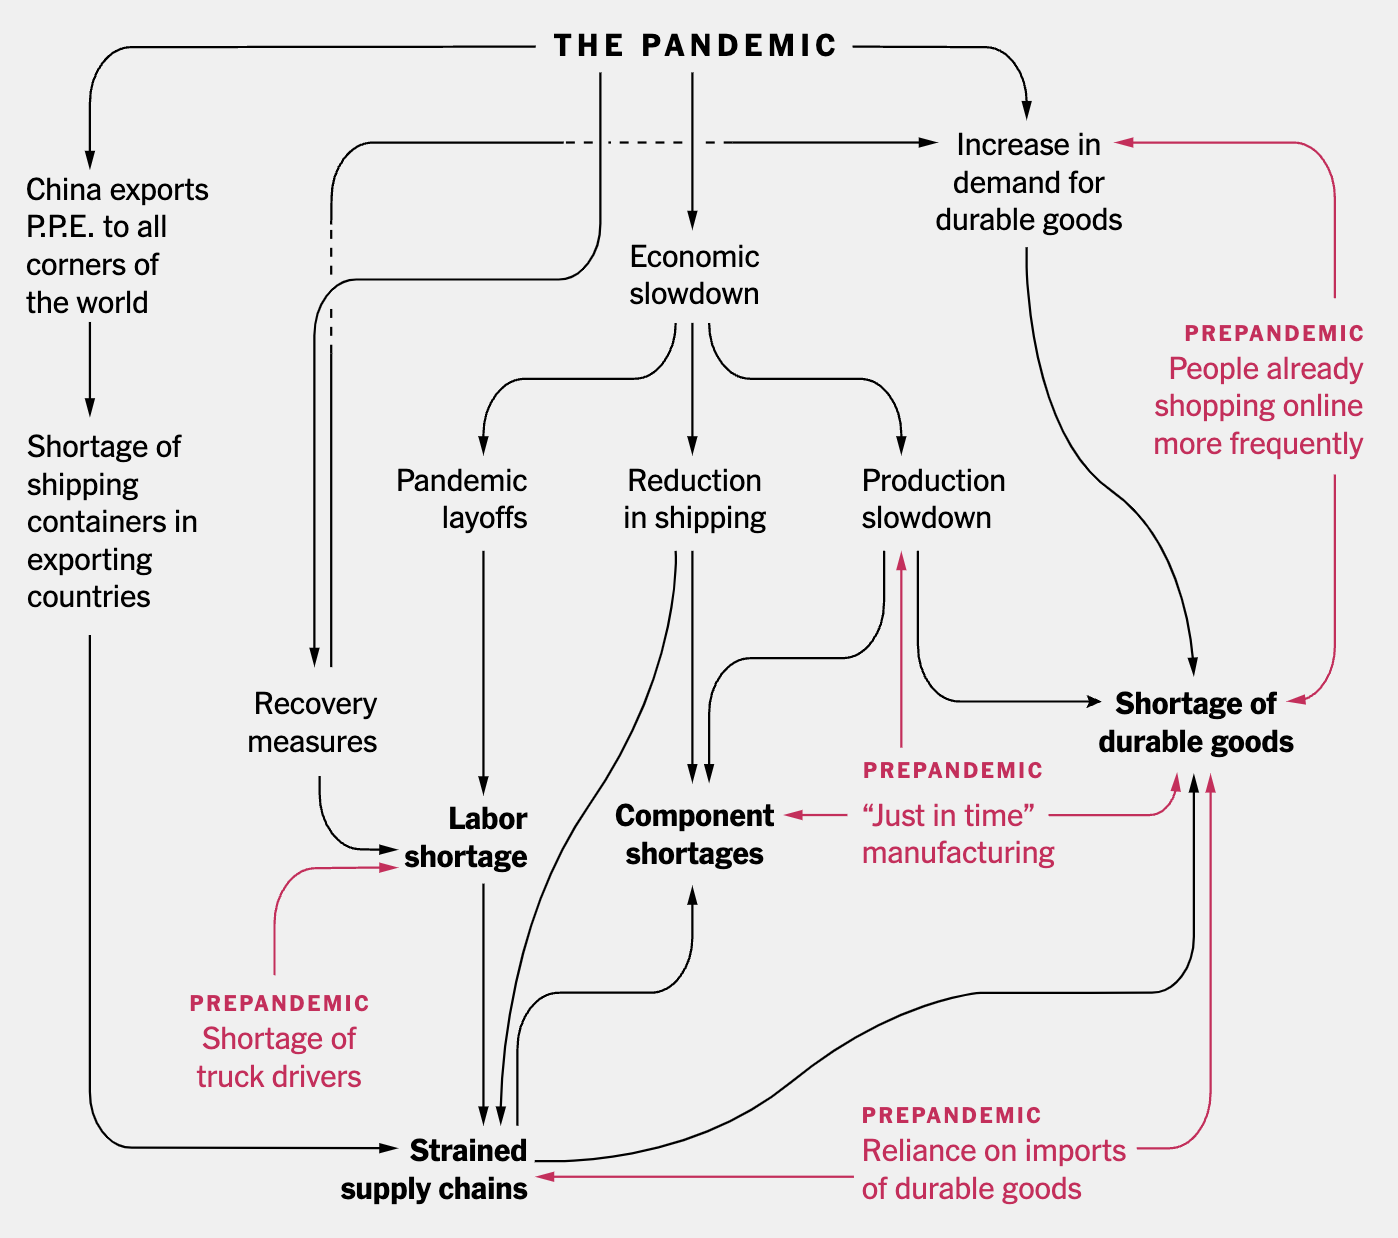 A schematic drawing explaining how the Covid-19 pandemic caused labor shortage, component shortages, shortage of durable goods and strained supply chains. Prepandemic situations are labelled in red, and the drawing has a lot of arrows